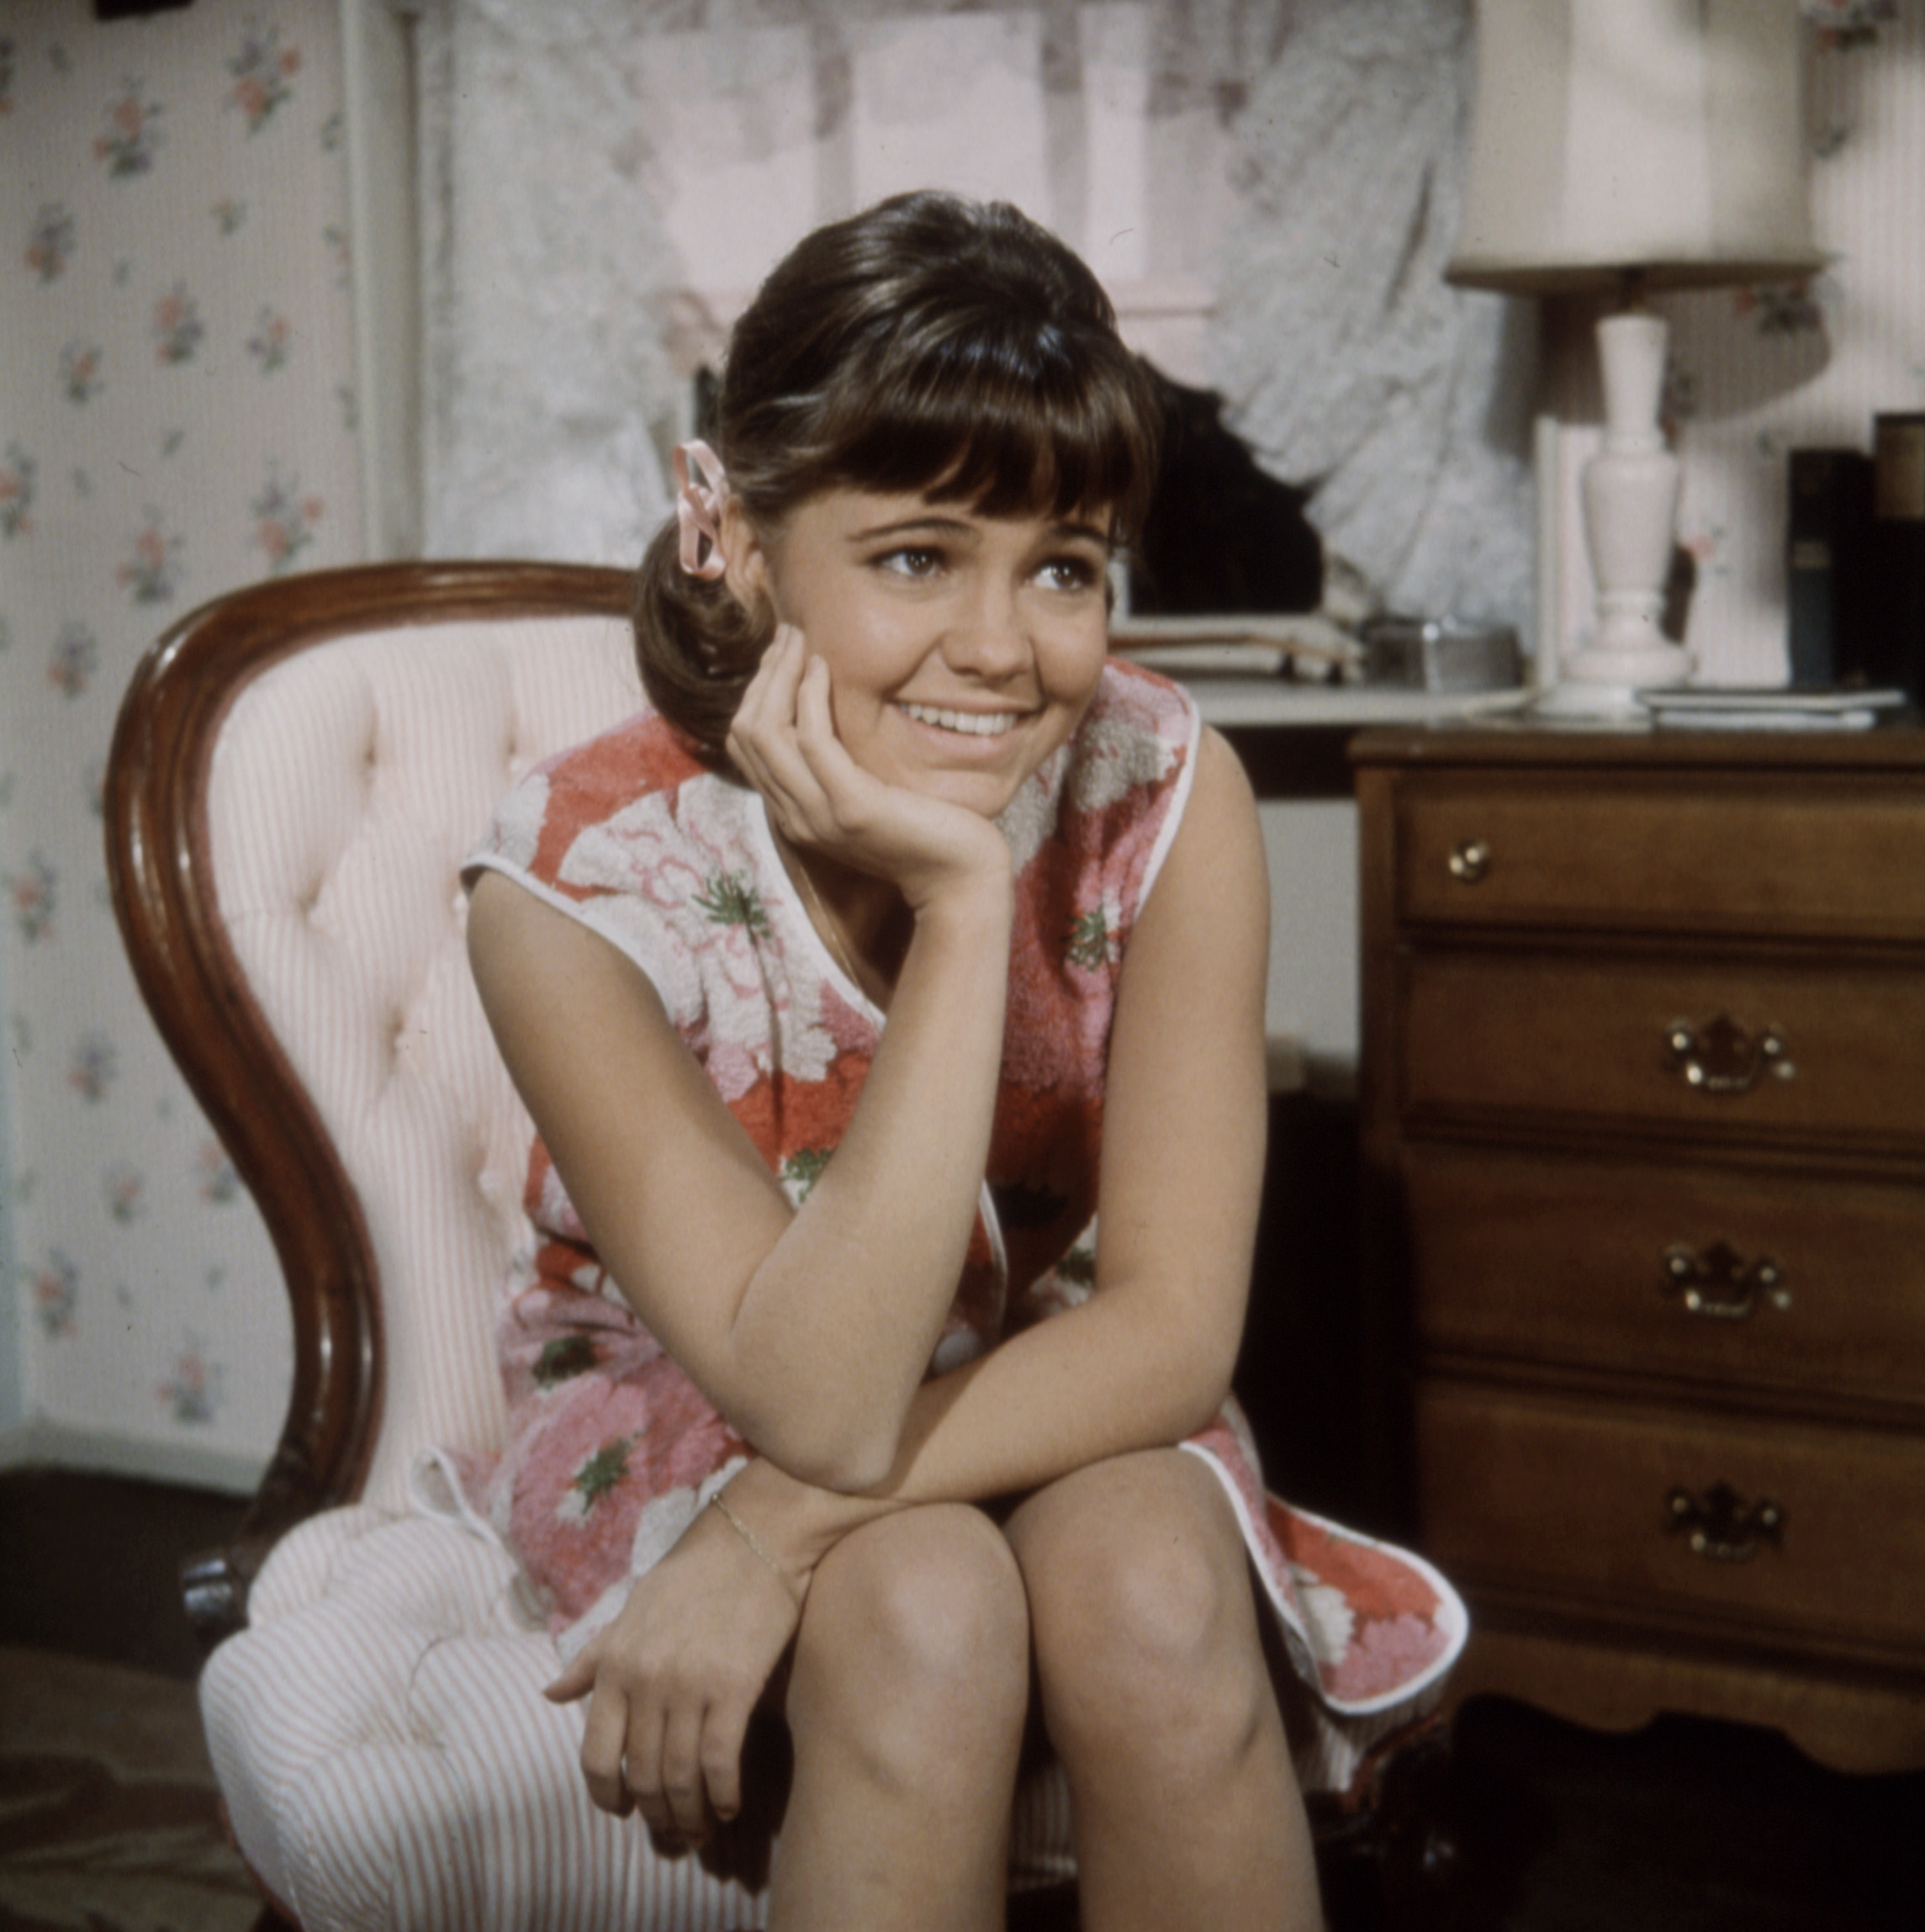 Sally Field as Gidget in the TV series "Gidget" in 1965 in Culver City, California | Source: Getty Images